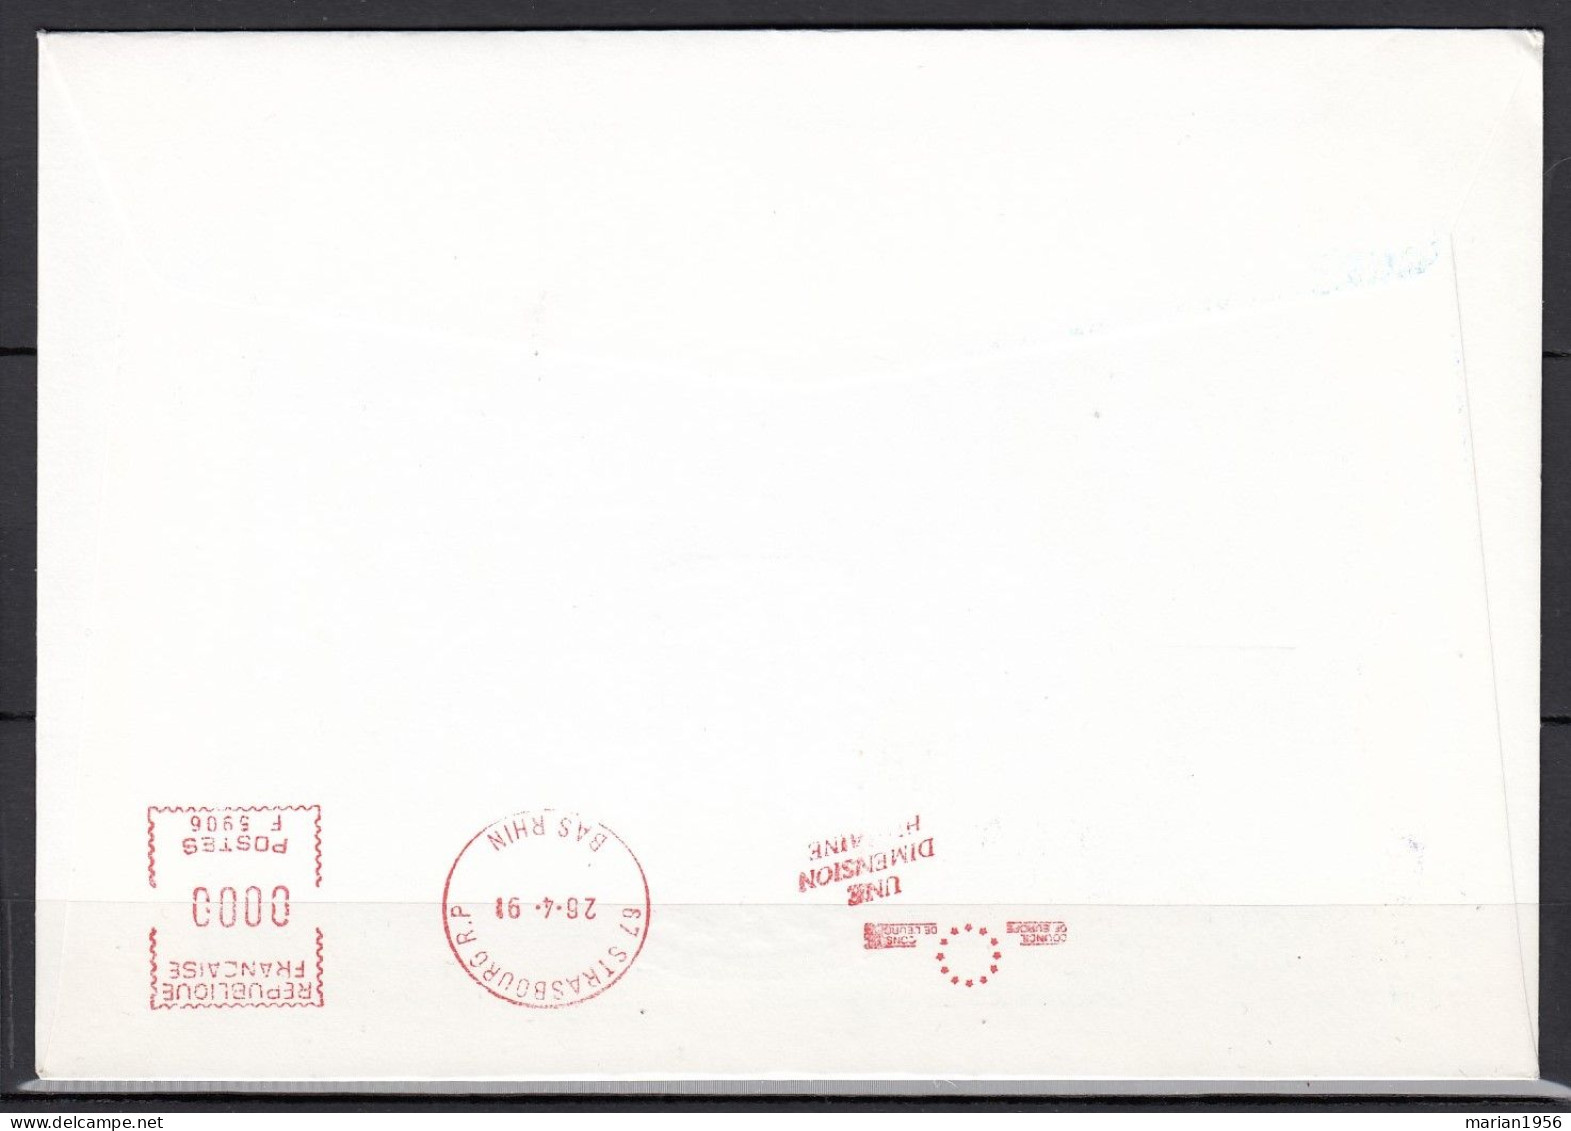 Norvege 1991 - FDC Special - EUROPA CEPT - Europe Spatiale  - Tirage Limite A 60 Ex. Numerotes - FDC